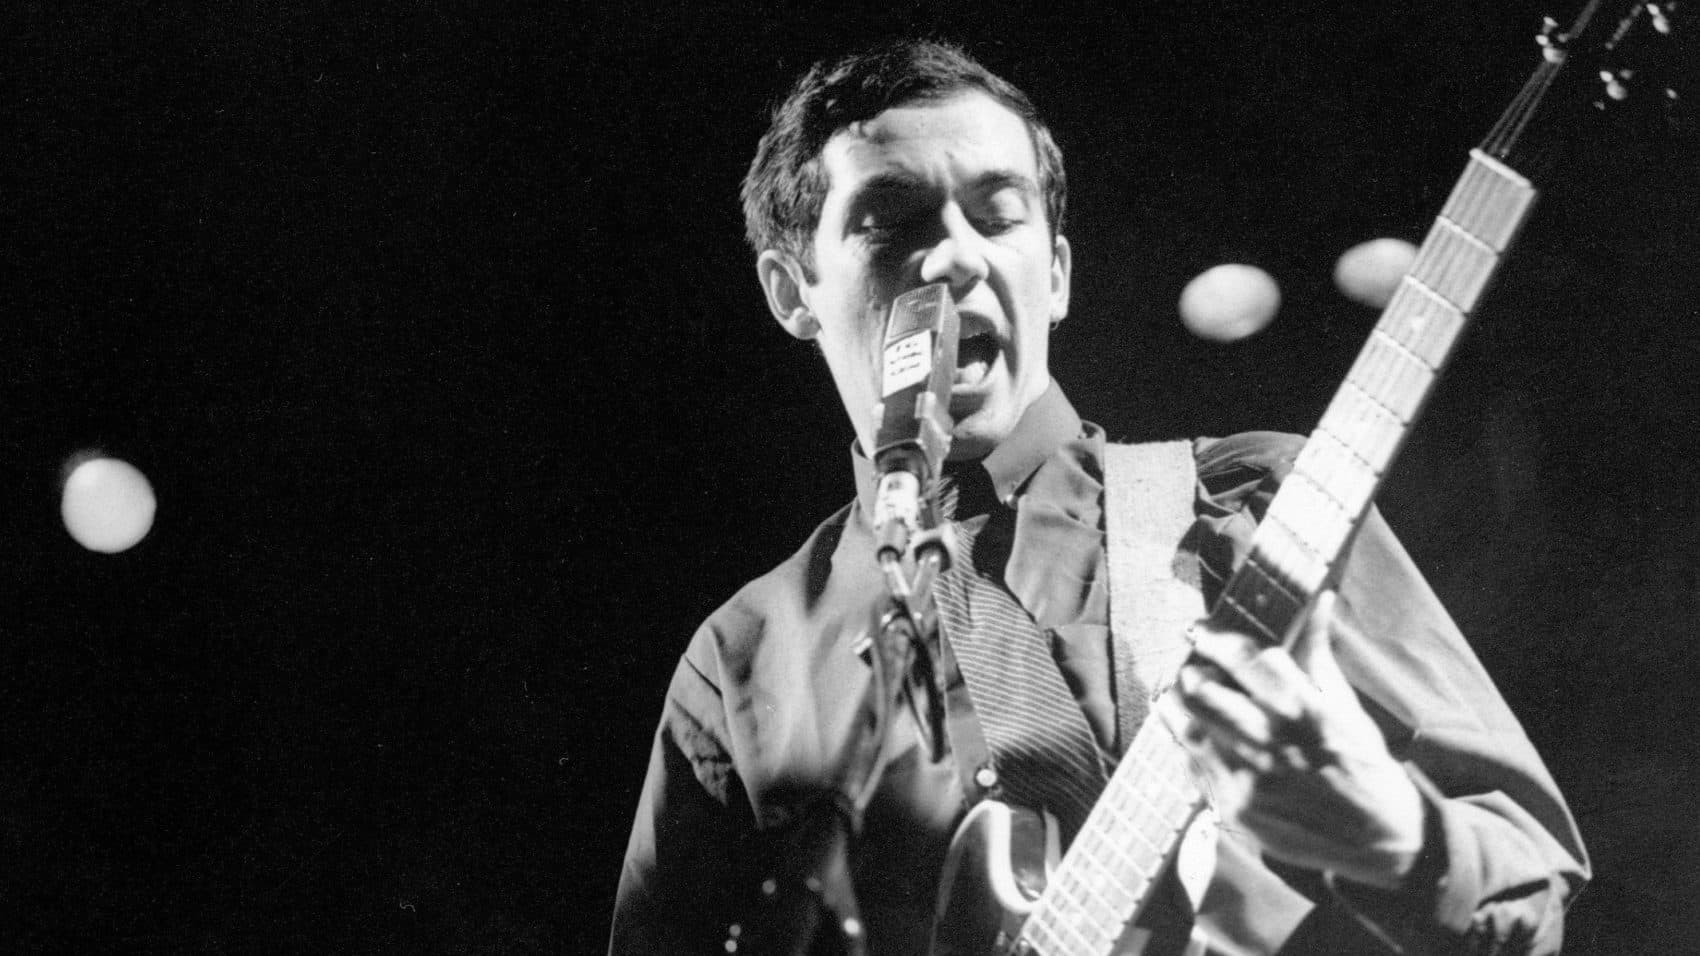 Buzzcocks' Pete Shelley on stage in 1979 (Courtesy)